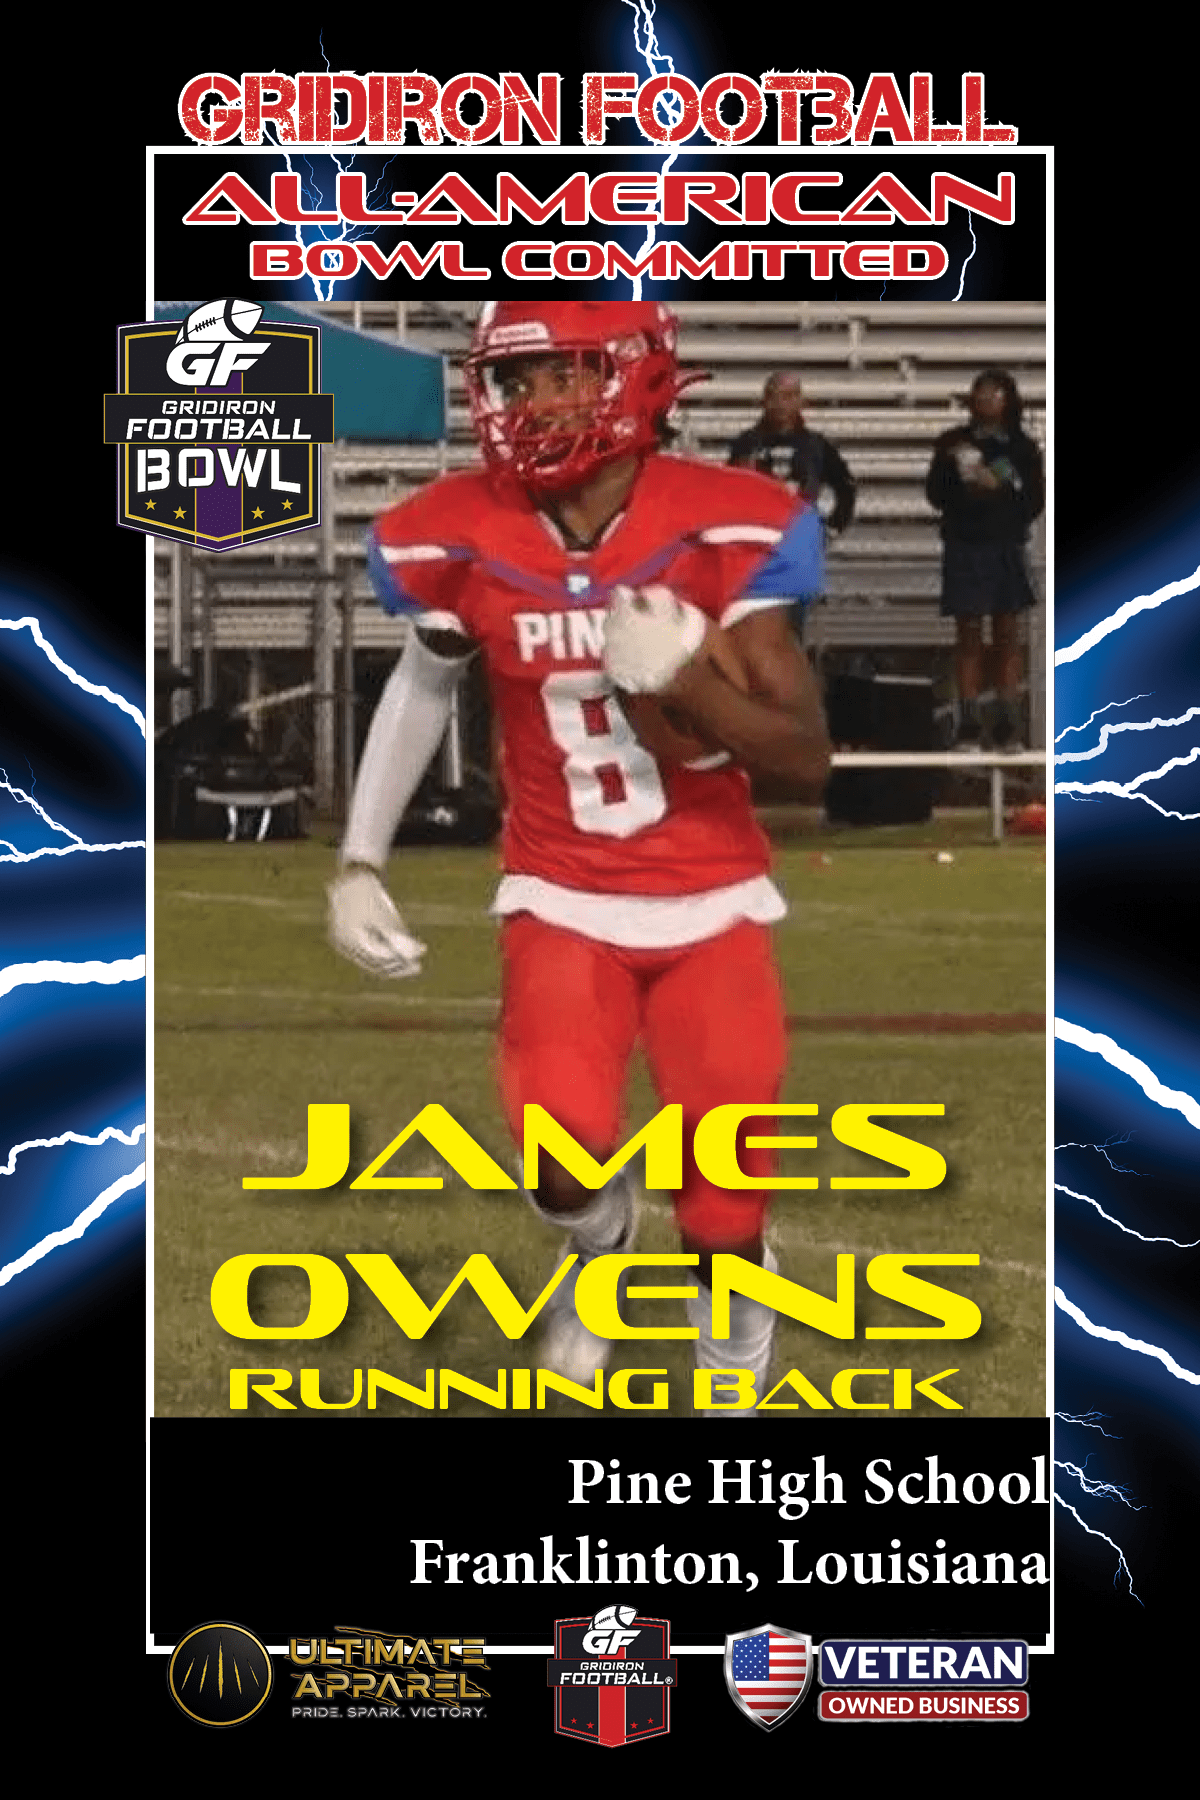 BREAKING NEWS: Pine High School (Franklinton, LA) RB James Owens Commits To The Gridiron Football All-American Bowl Game